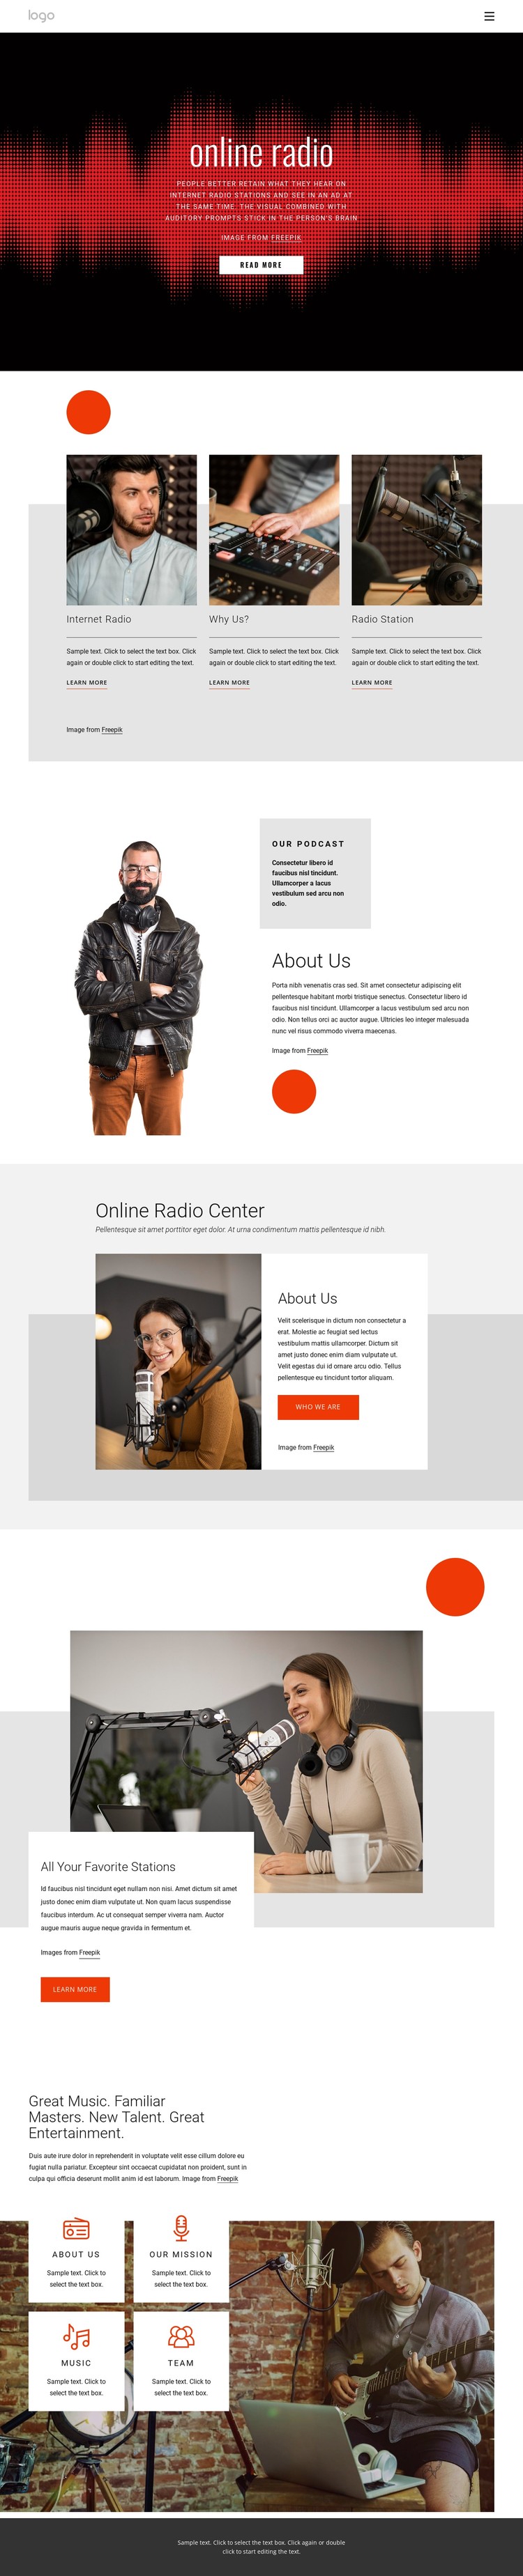 Online radio shows CSS Template